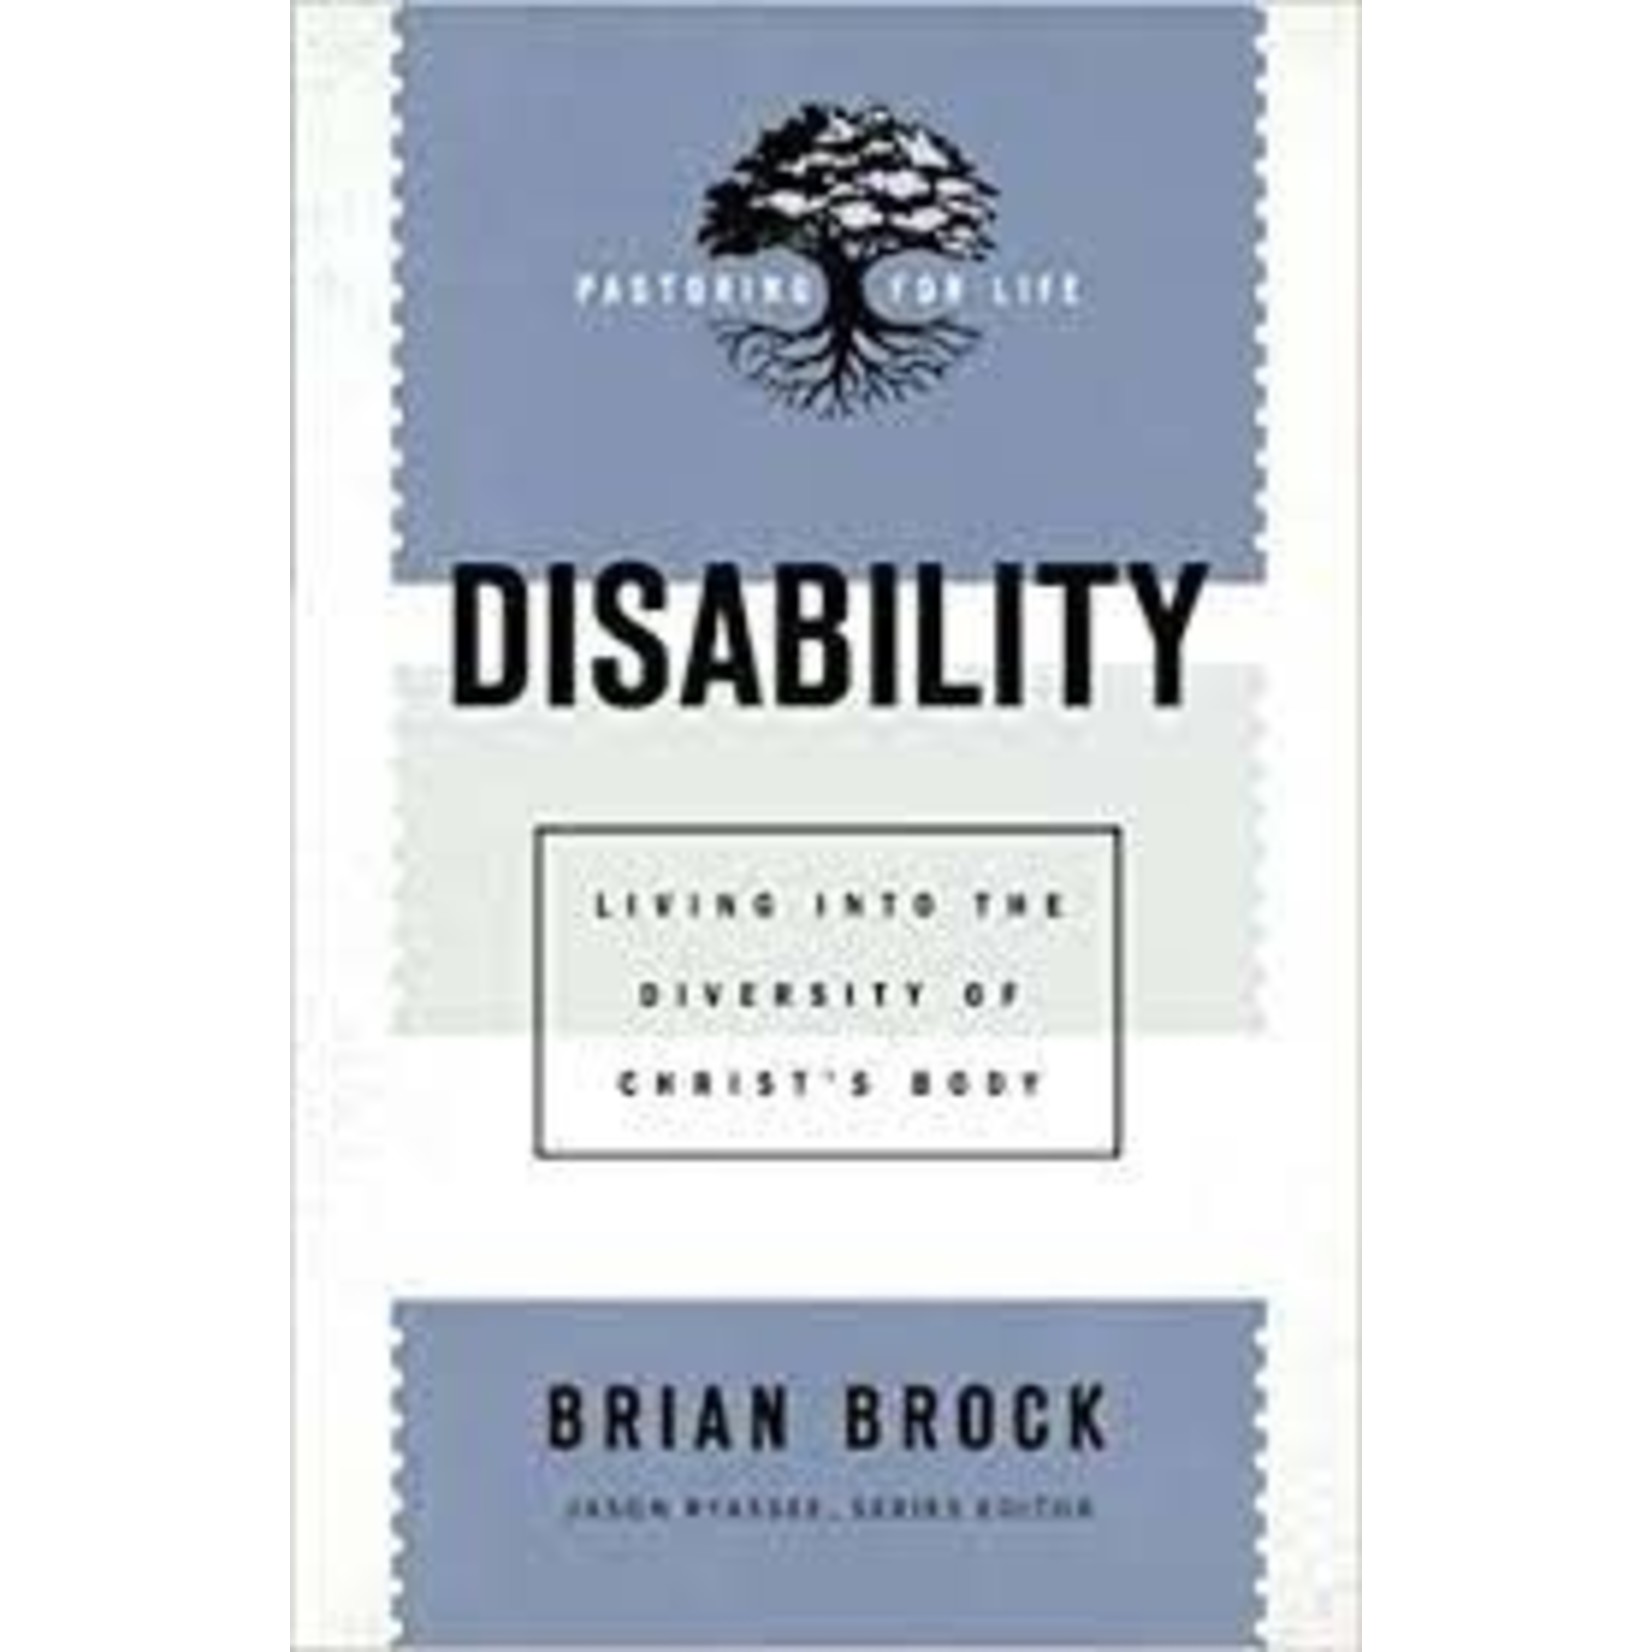 Disability: Living into the Diversity of Christ's Body